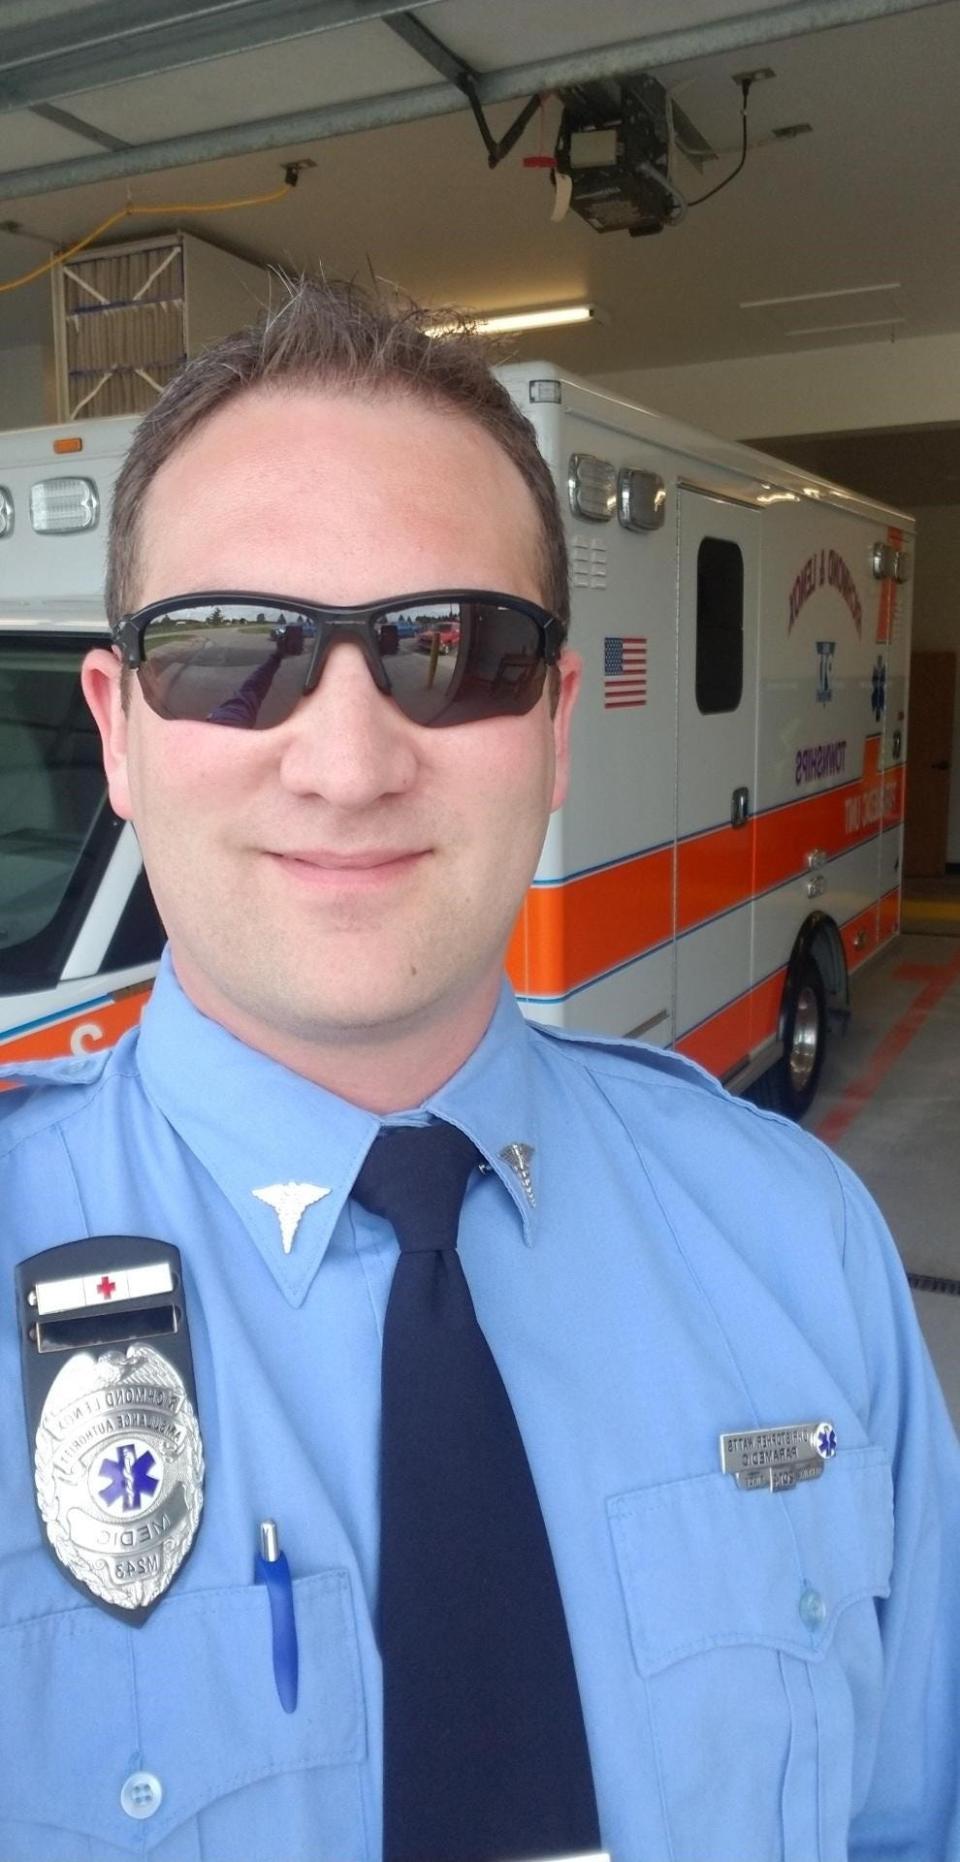 Christopher Watts, a paramedic for Richmond/Lenox EMS, says staffing levels are critically low not only for his company, but for emergency medical services around the state.